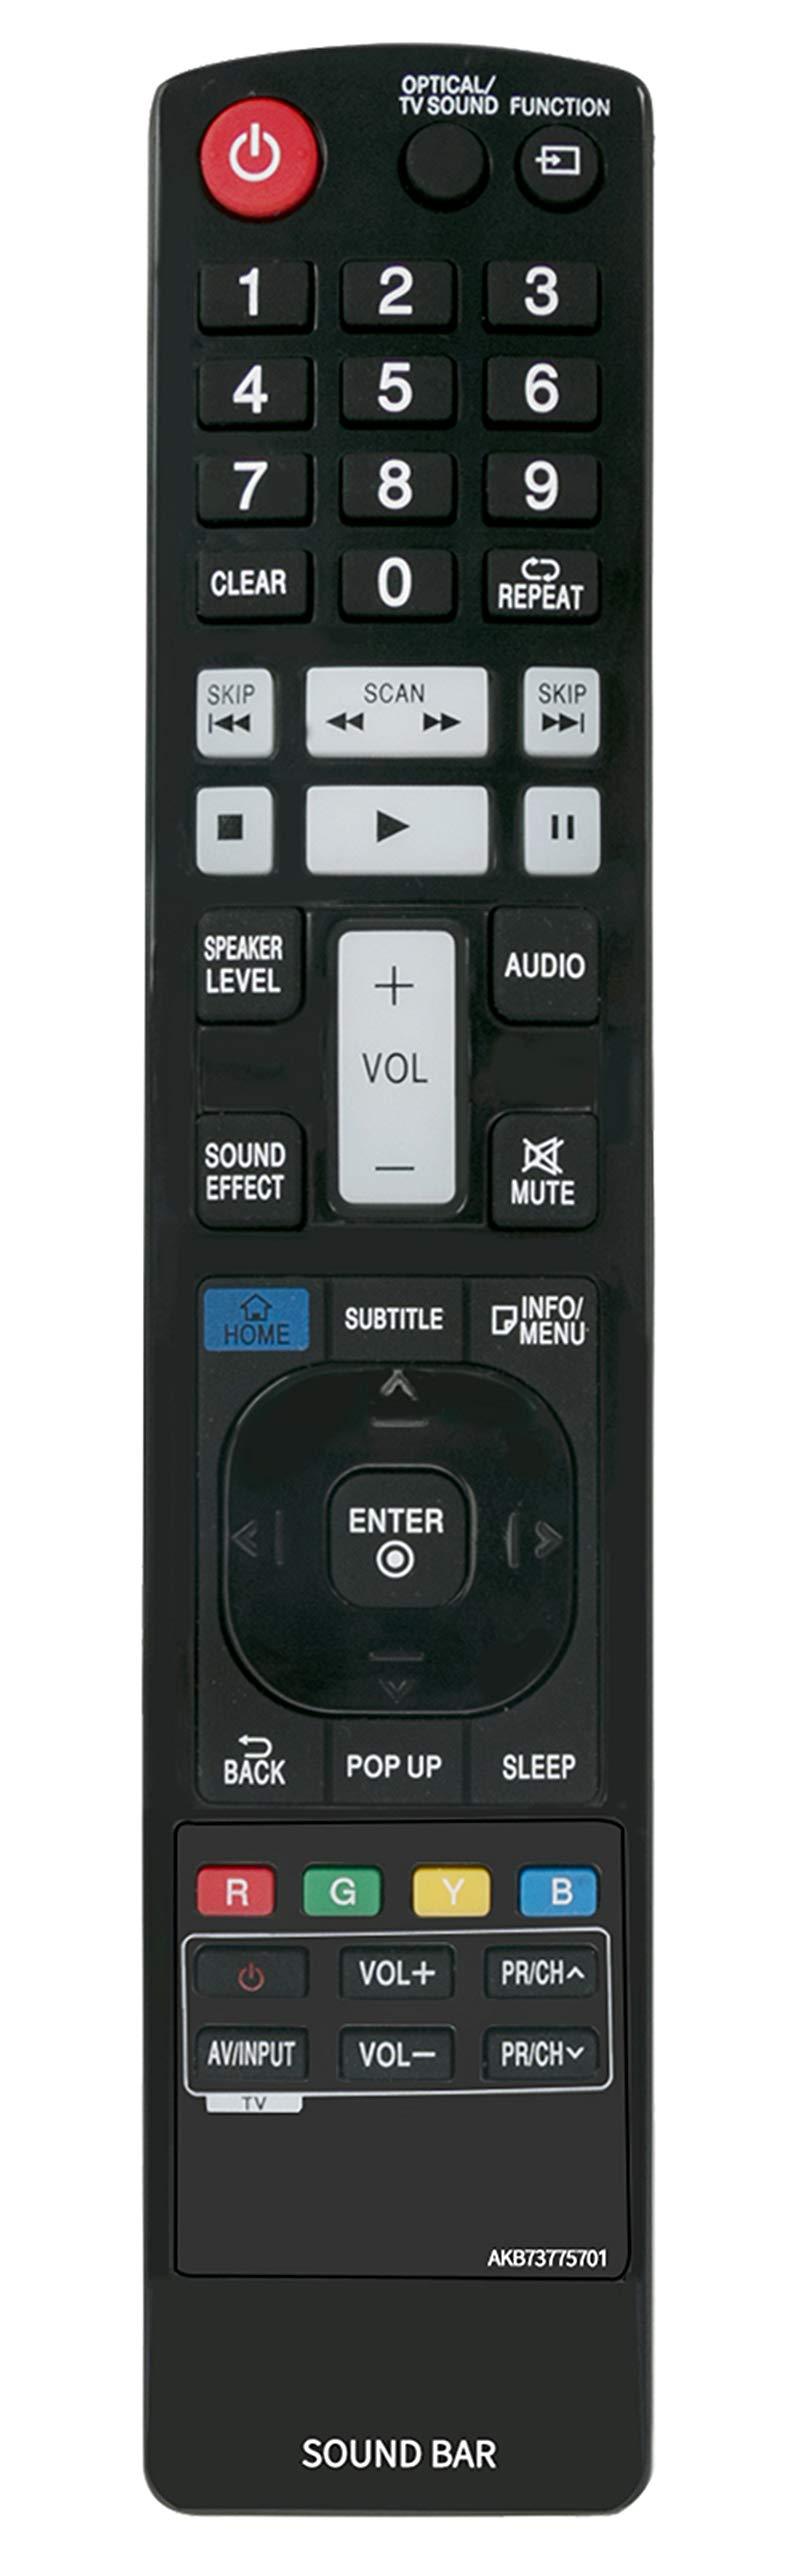 AKB73775701 Replaced Remote fit for LG Smart Sound Bar NB3730A NB3732A S33A1-D NB3740 S34A1-D NB3730ANB